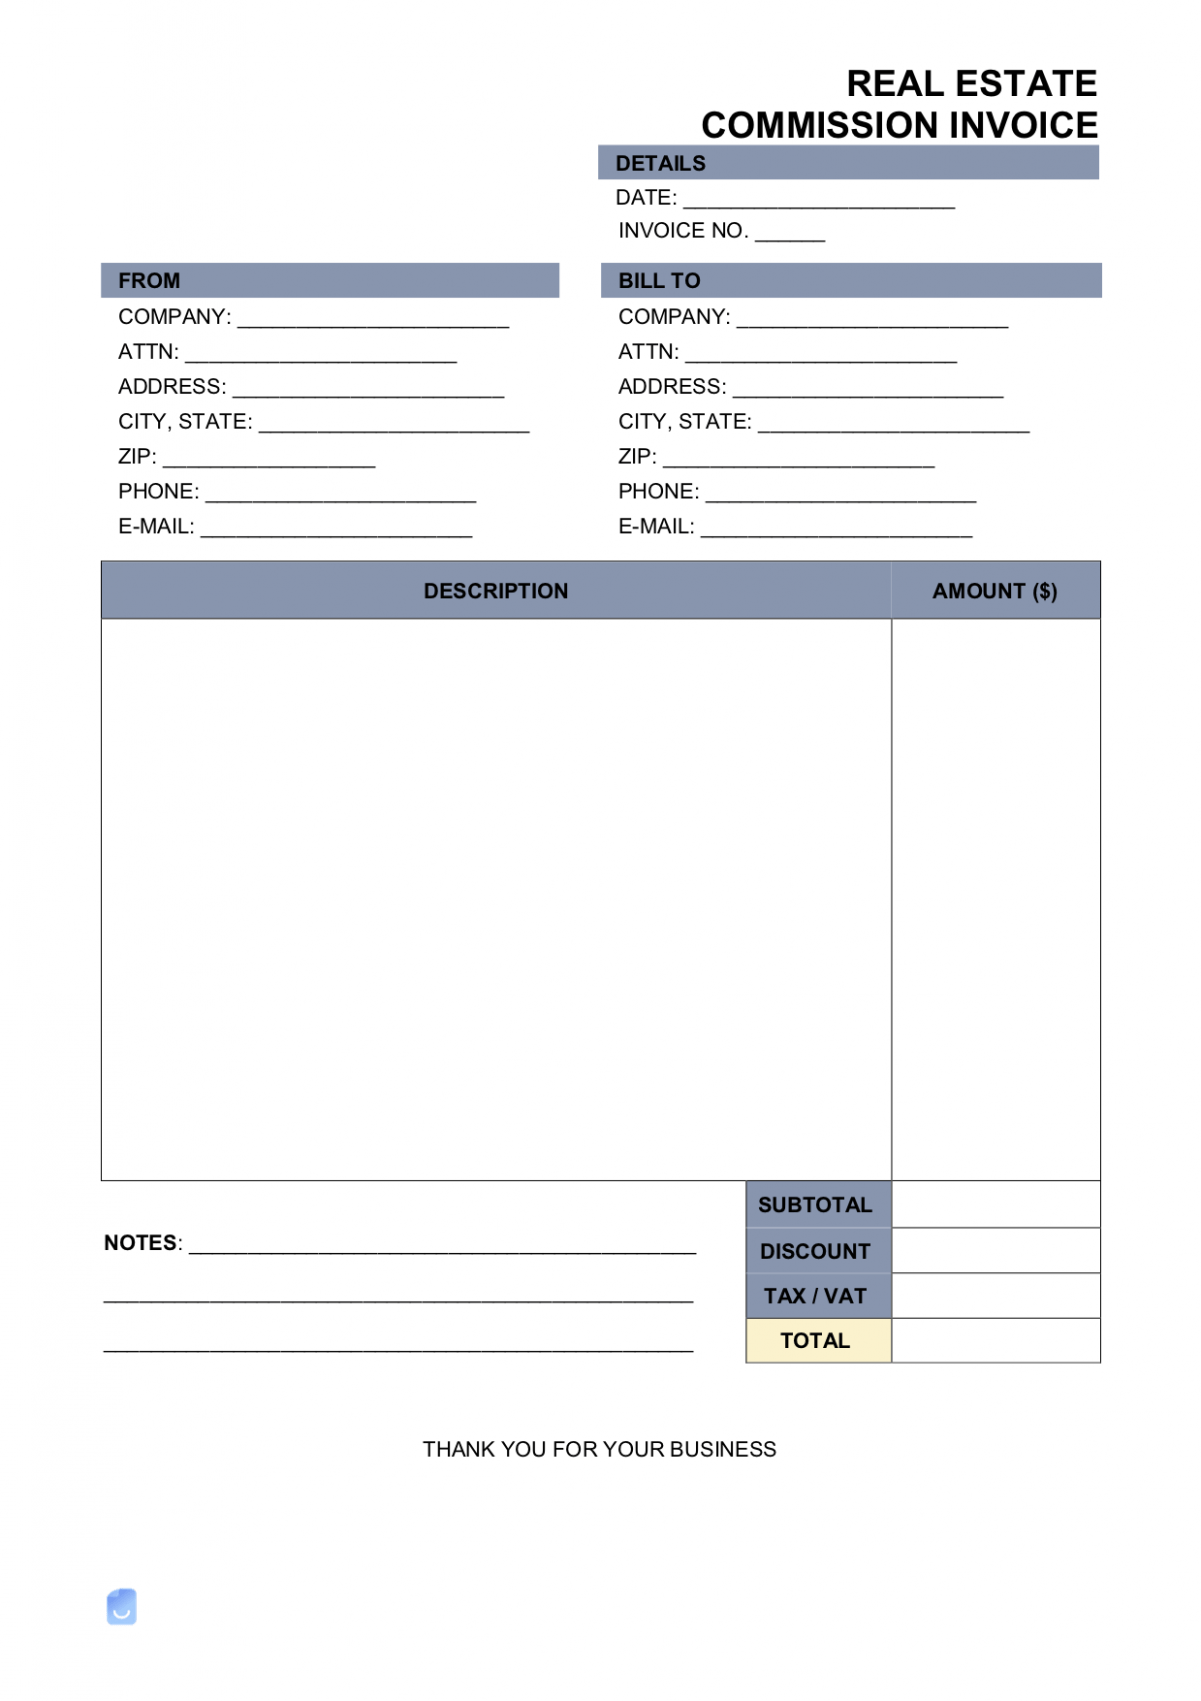 Sample Real Estate Commission Invoice Template Sample